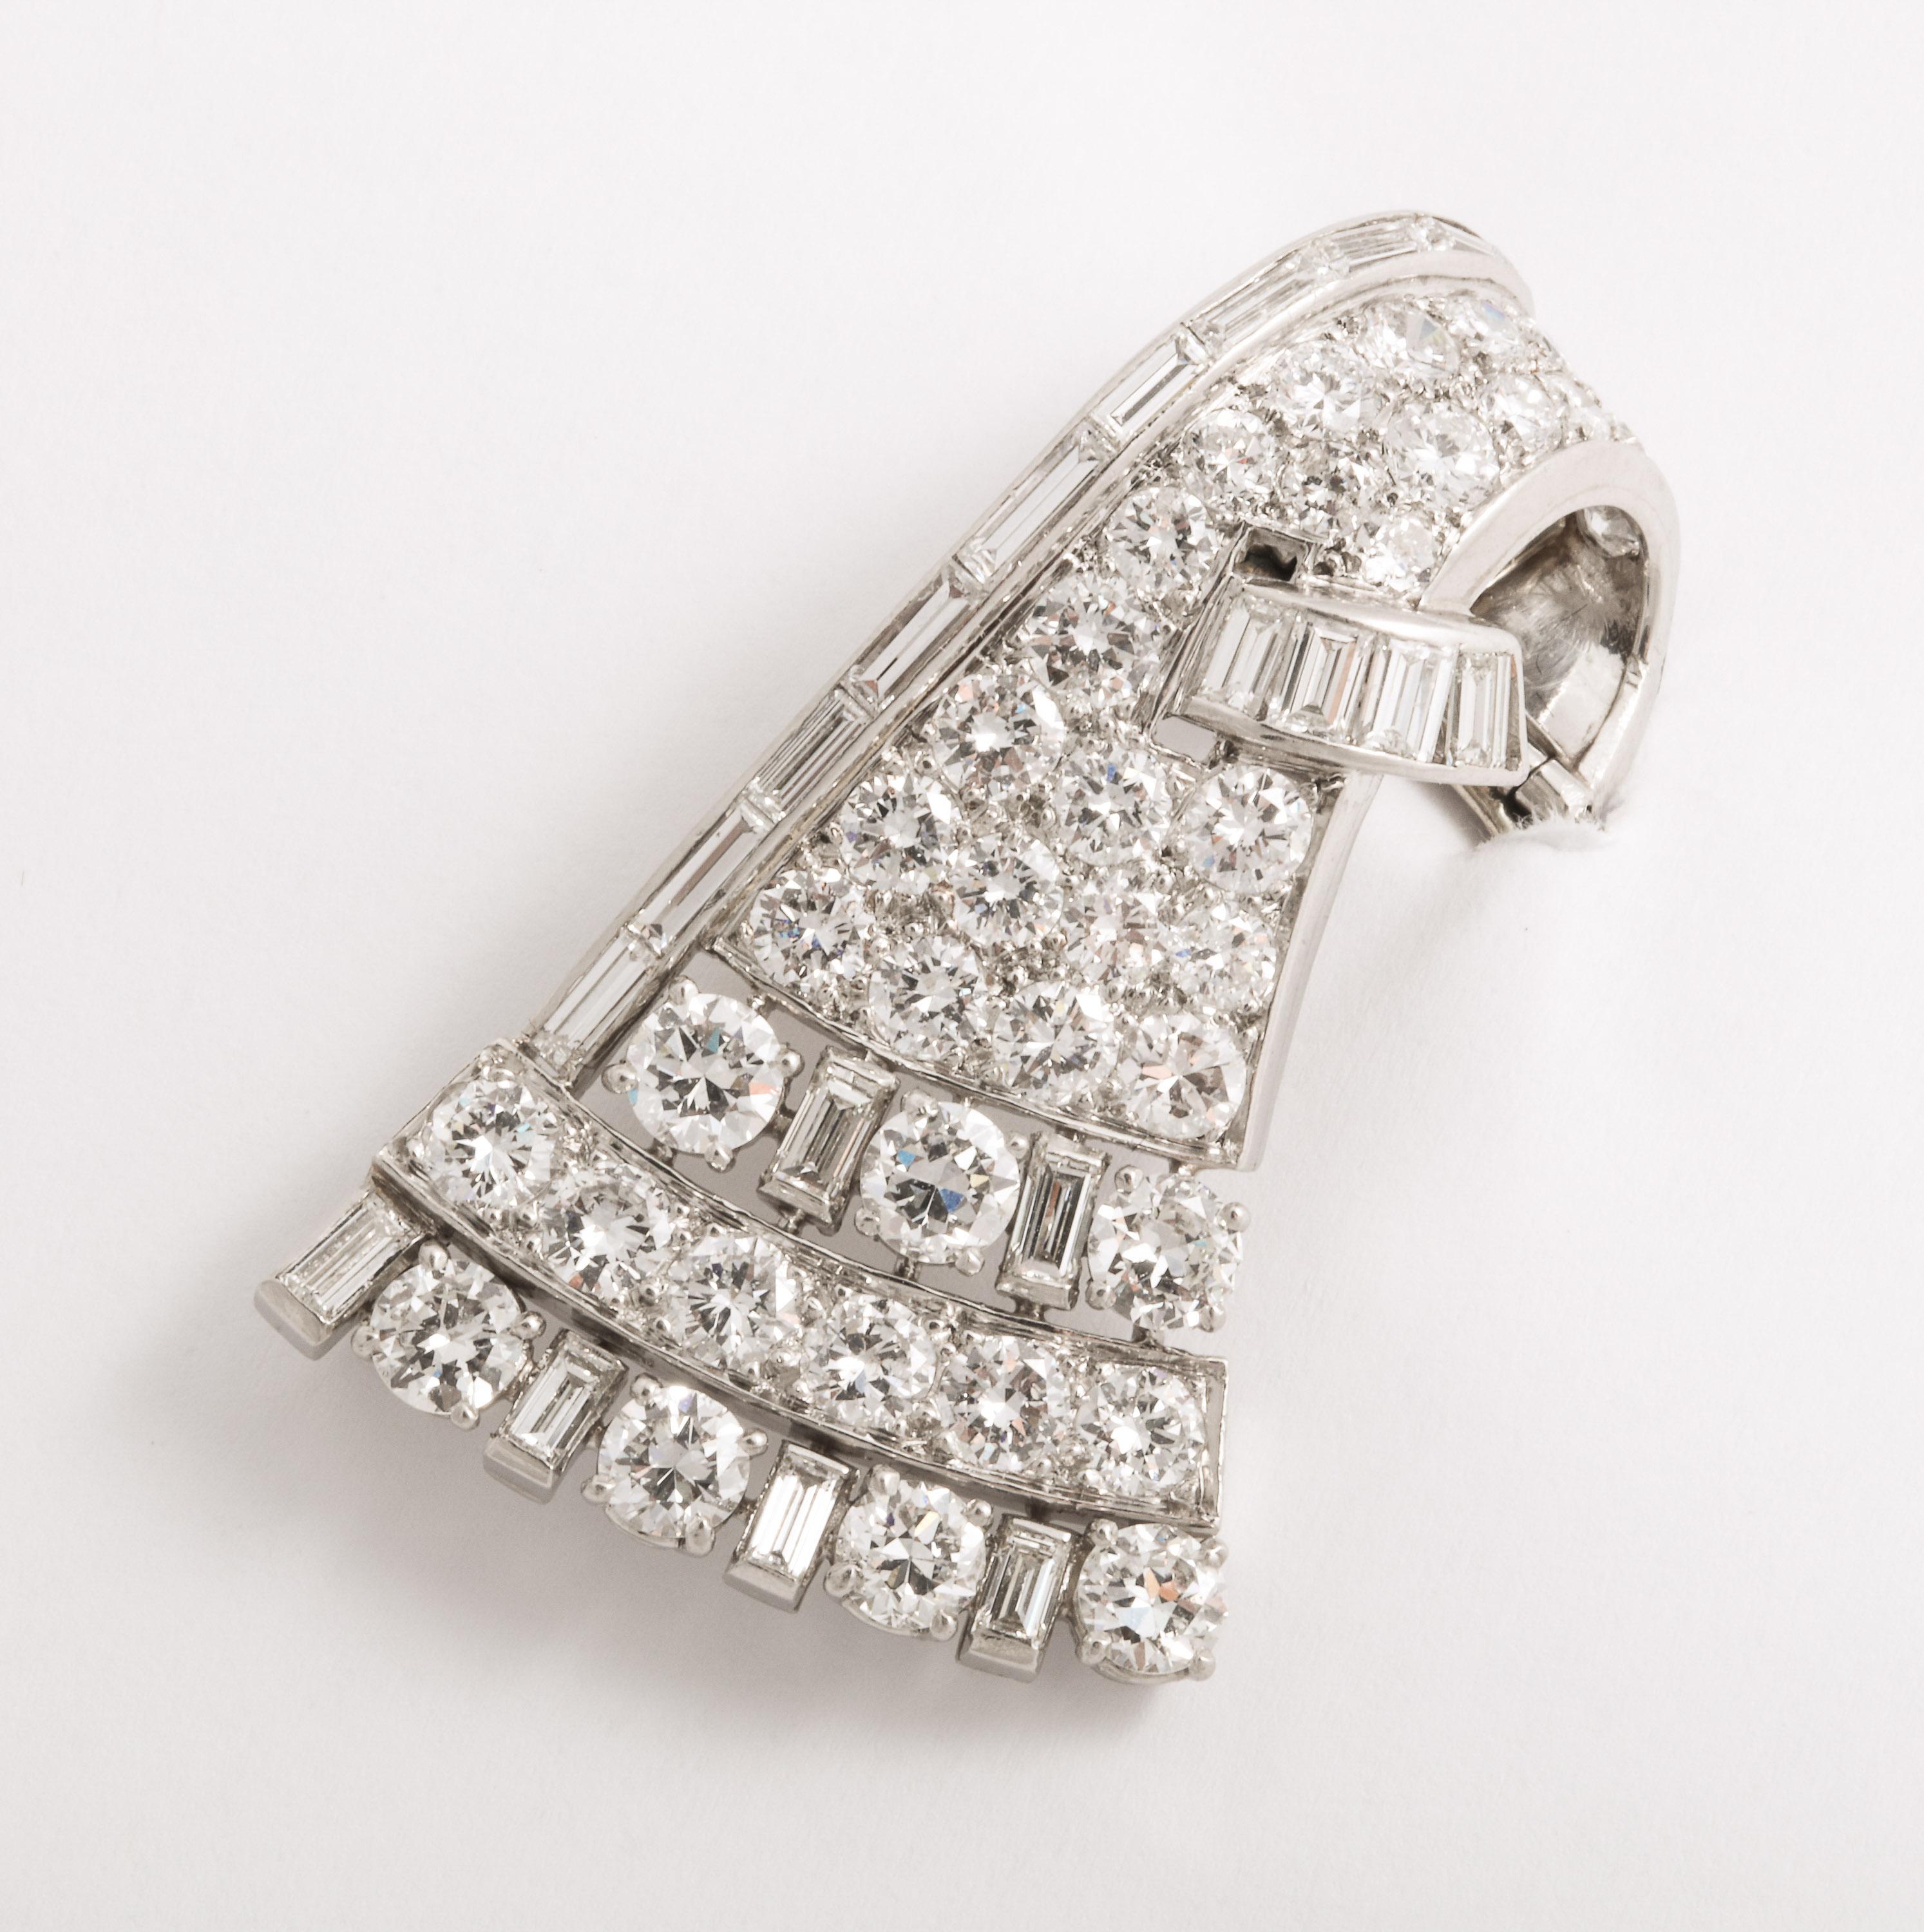 One half of an Art Deco connecting Diamond Clips - now separated and being sold as a single.  Can be mounted and worn as a Drop on a chain or worn as a clip on a jacket shoulder for a sleeve.  Very high style.  Approx 6 carats of very fine - full